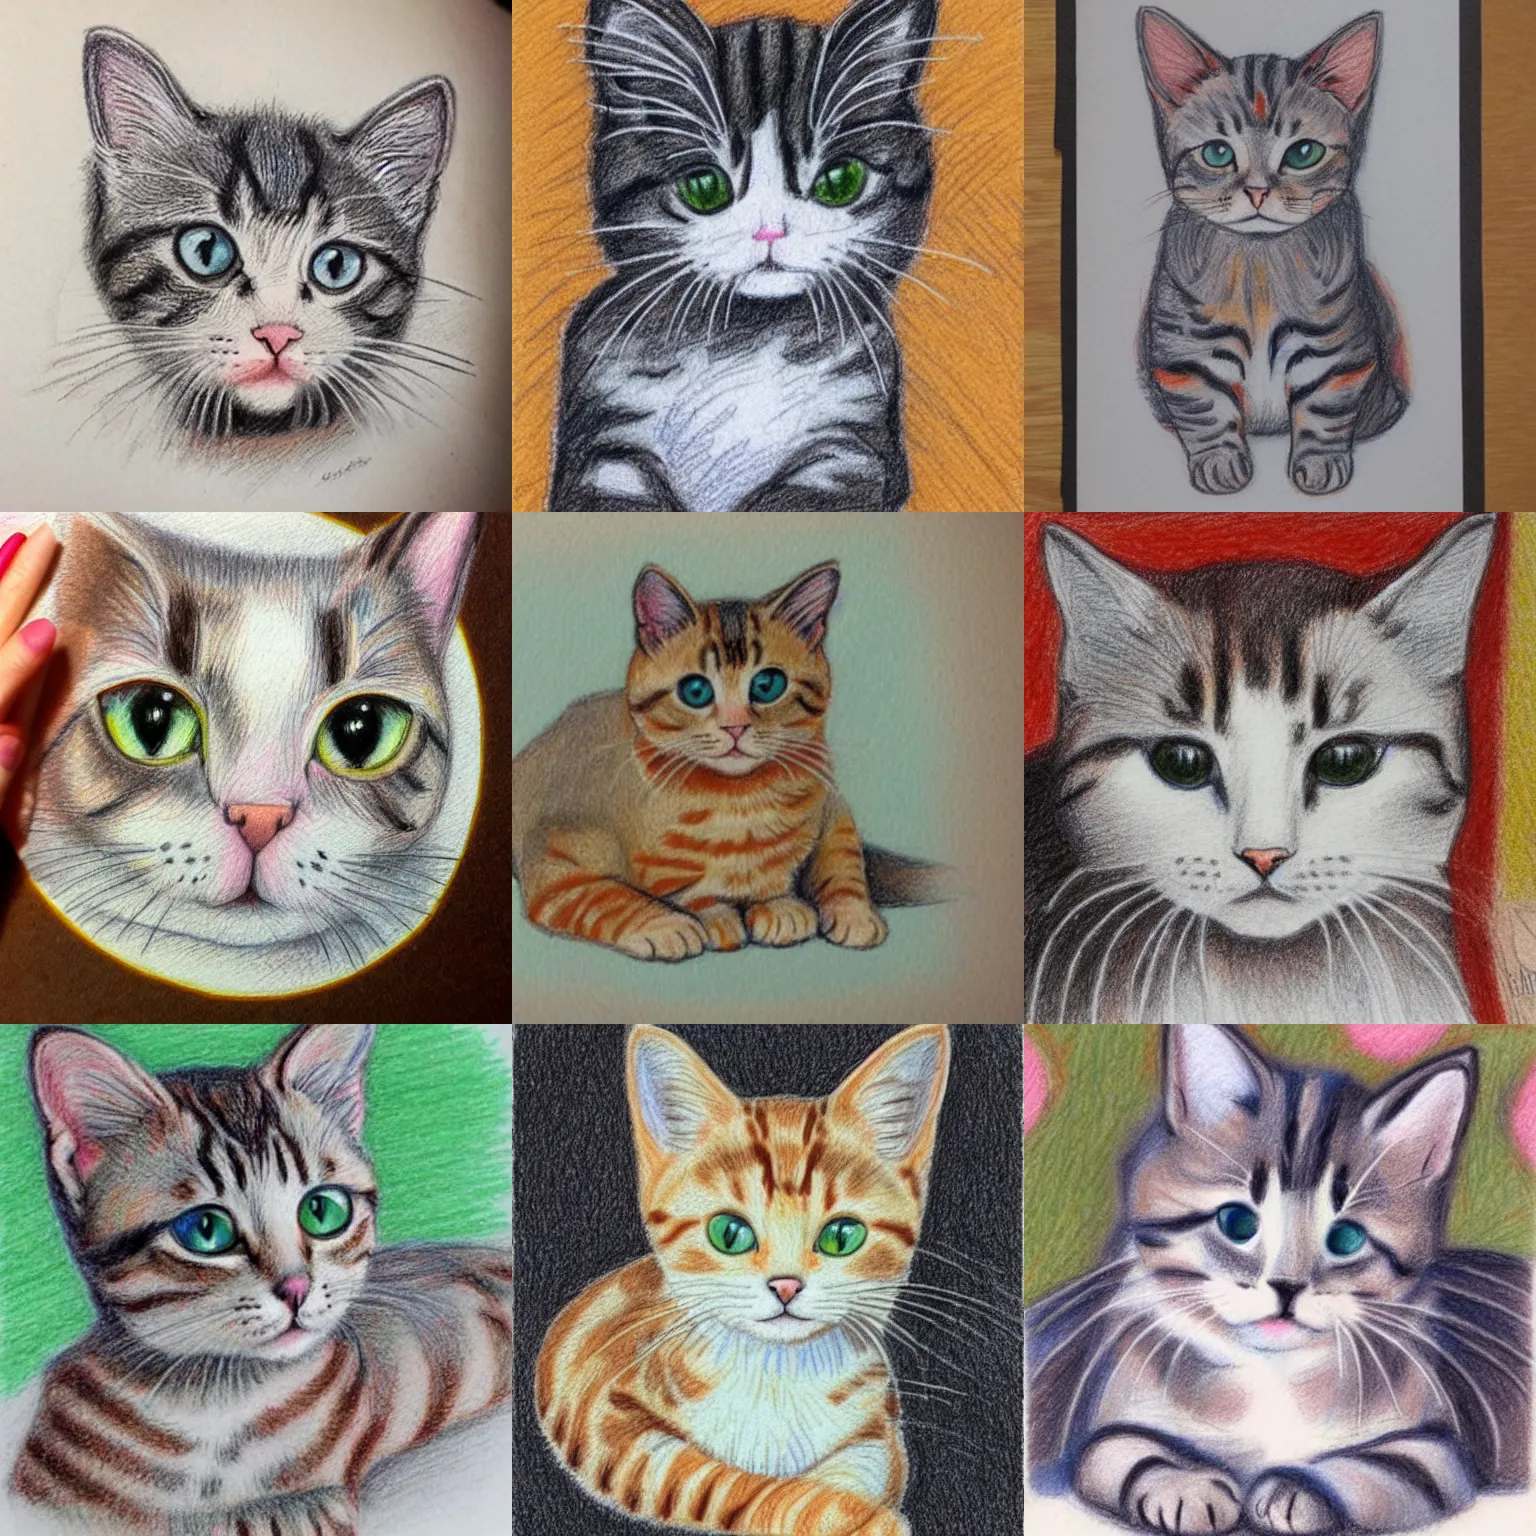 Kitty Colors Colored Pencil Set for Cat Lovers